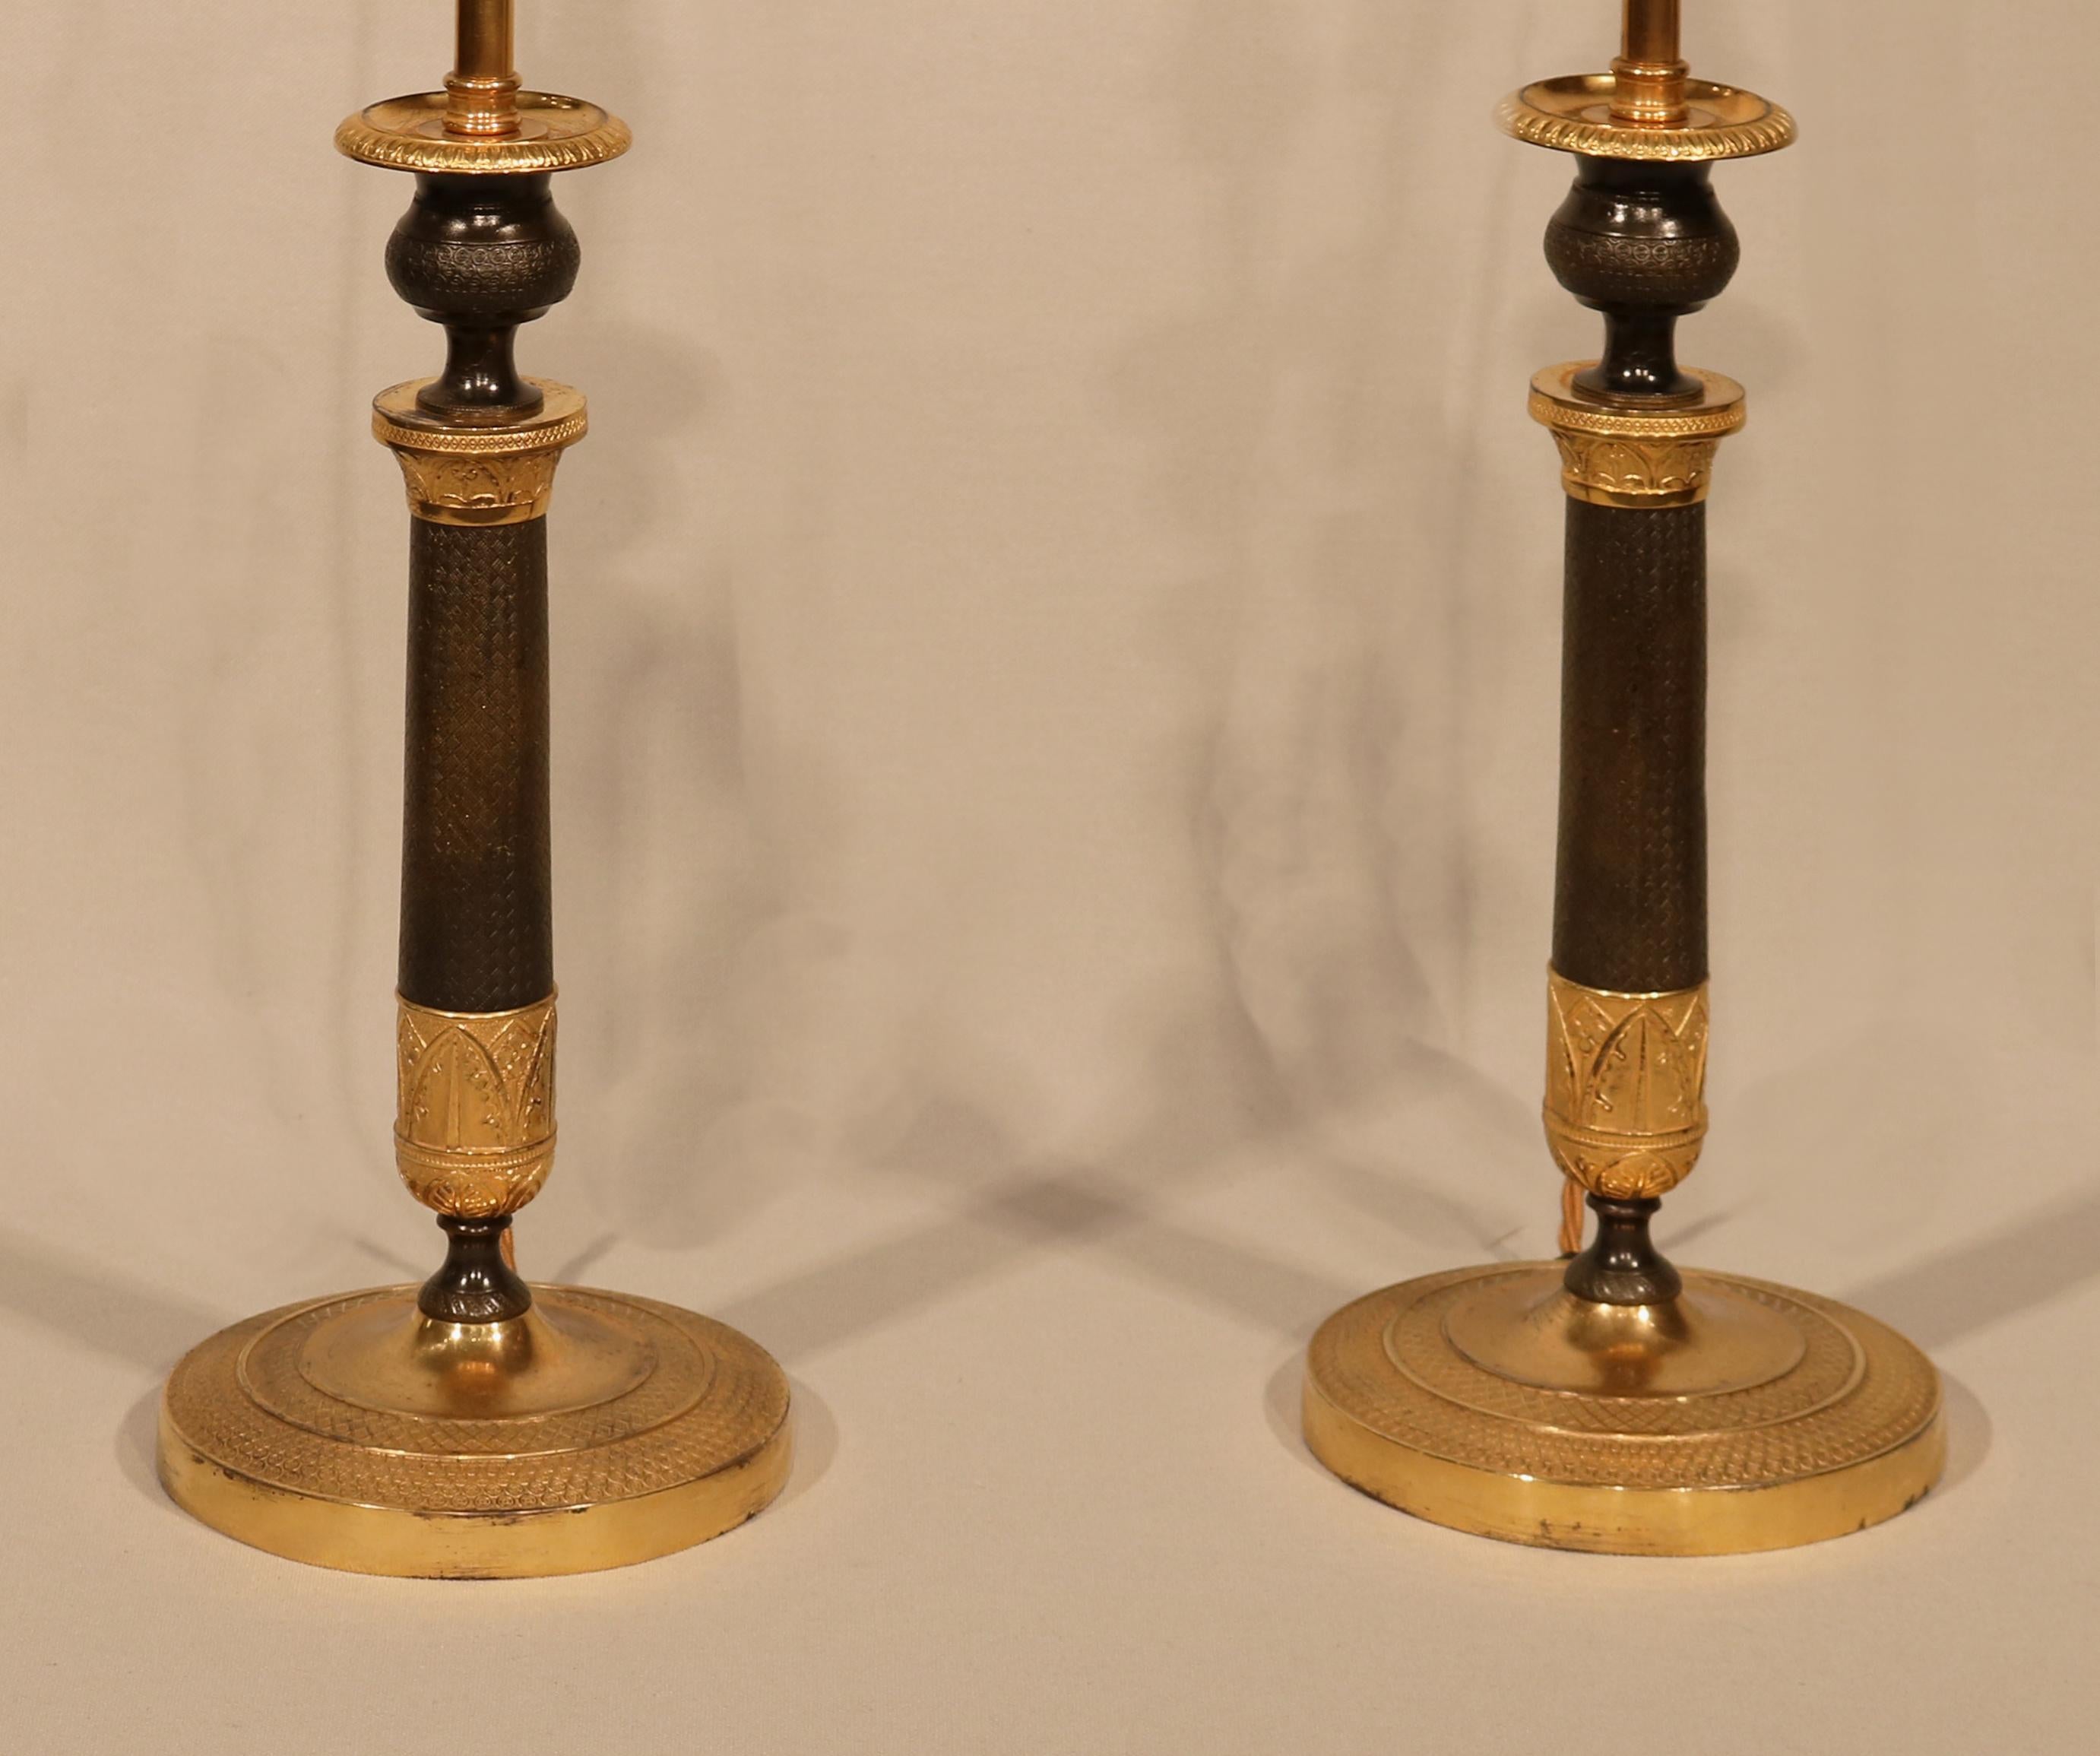 A large pair of early 19th century candlesticks having engine-turned urn-shaped nozzles above leaf and flower decorated engine-turned stems ending on similarly decorated circular bases.